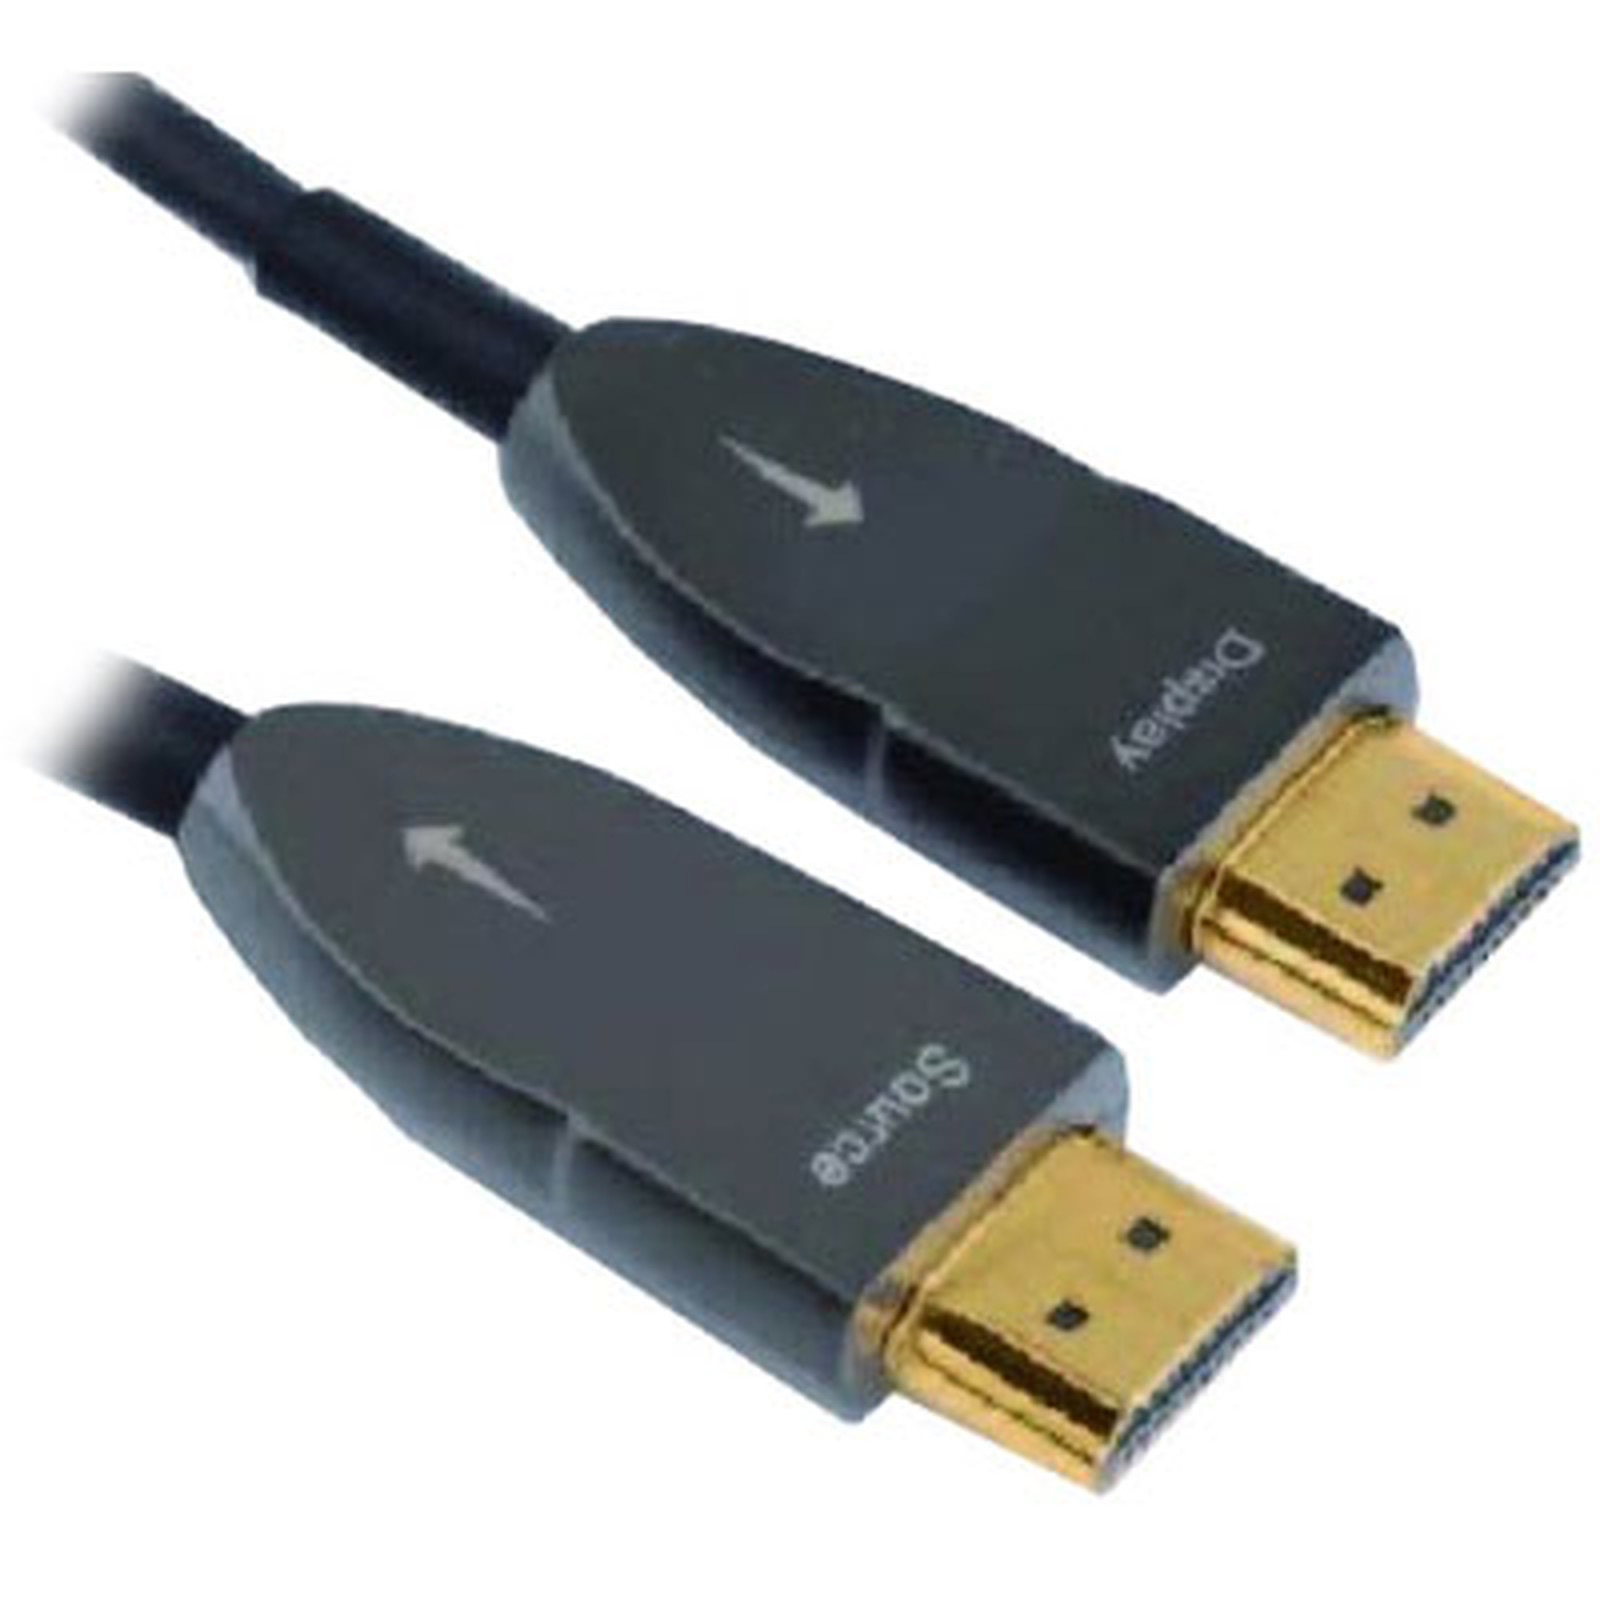 Real Cable HD-OPTIC (10m) - HDMI Real Cable